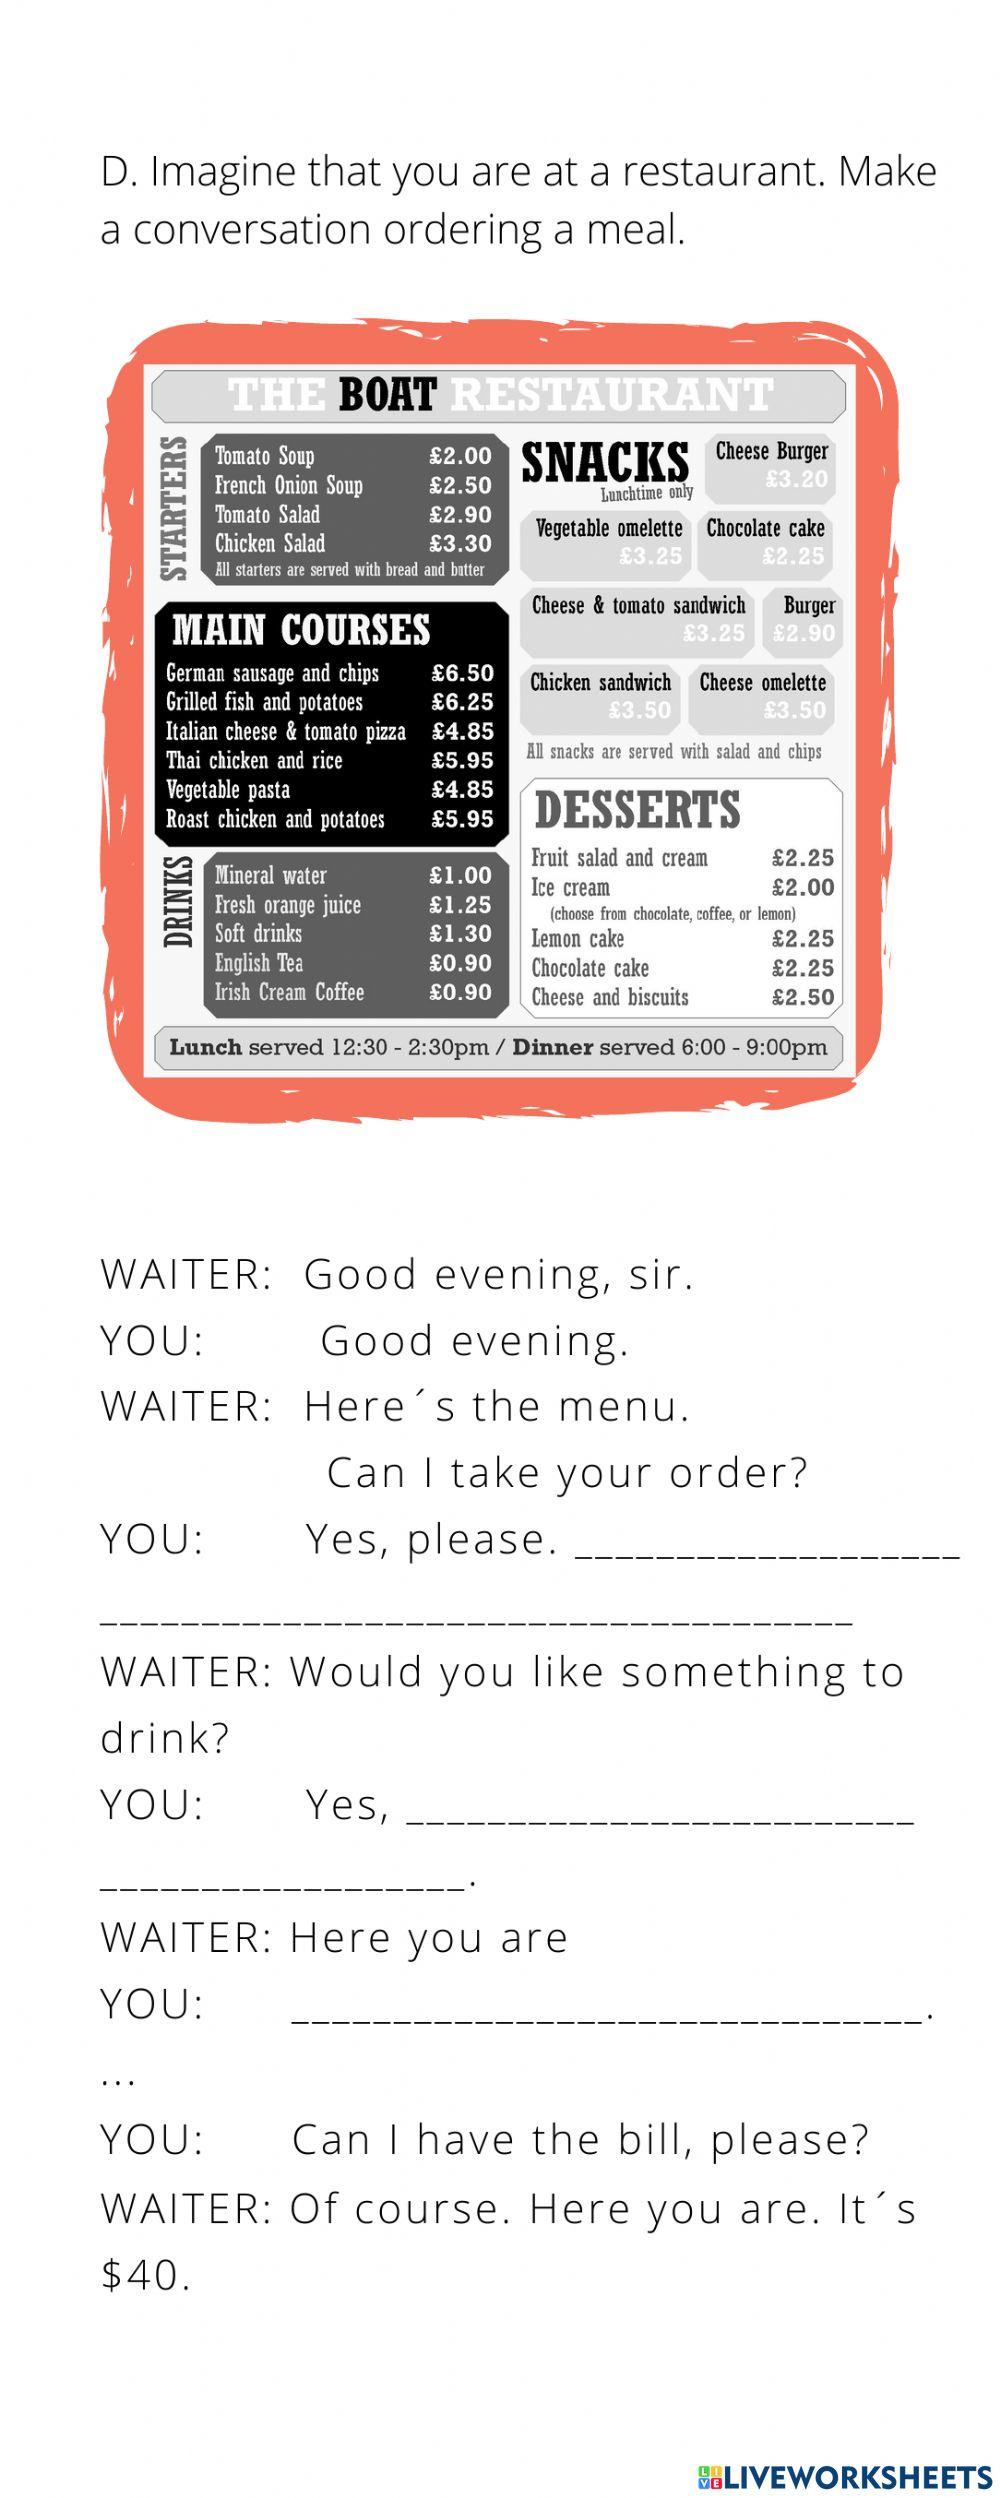 Ordering a meal